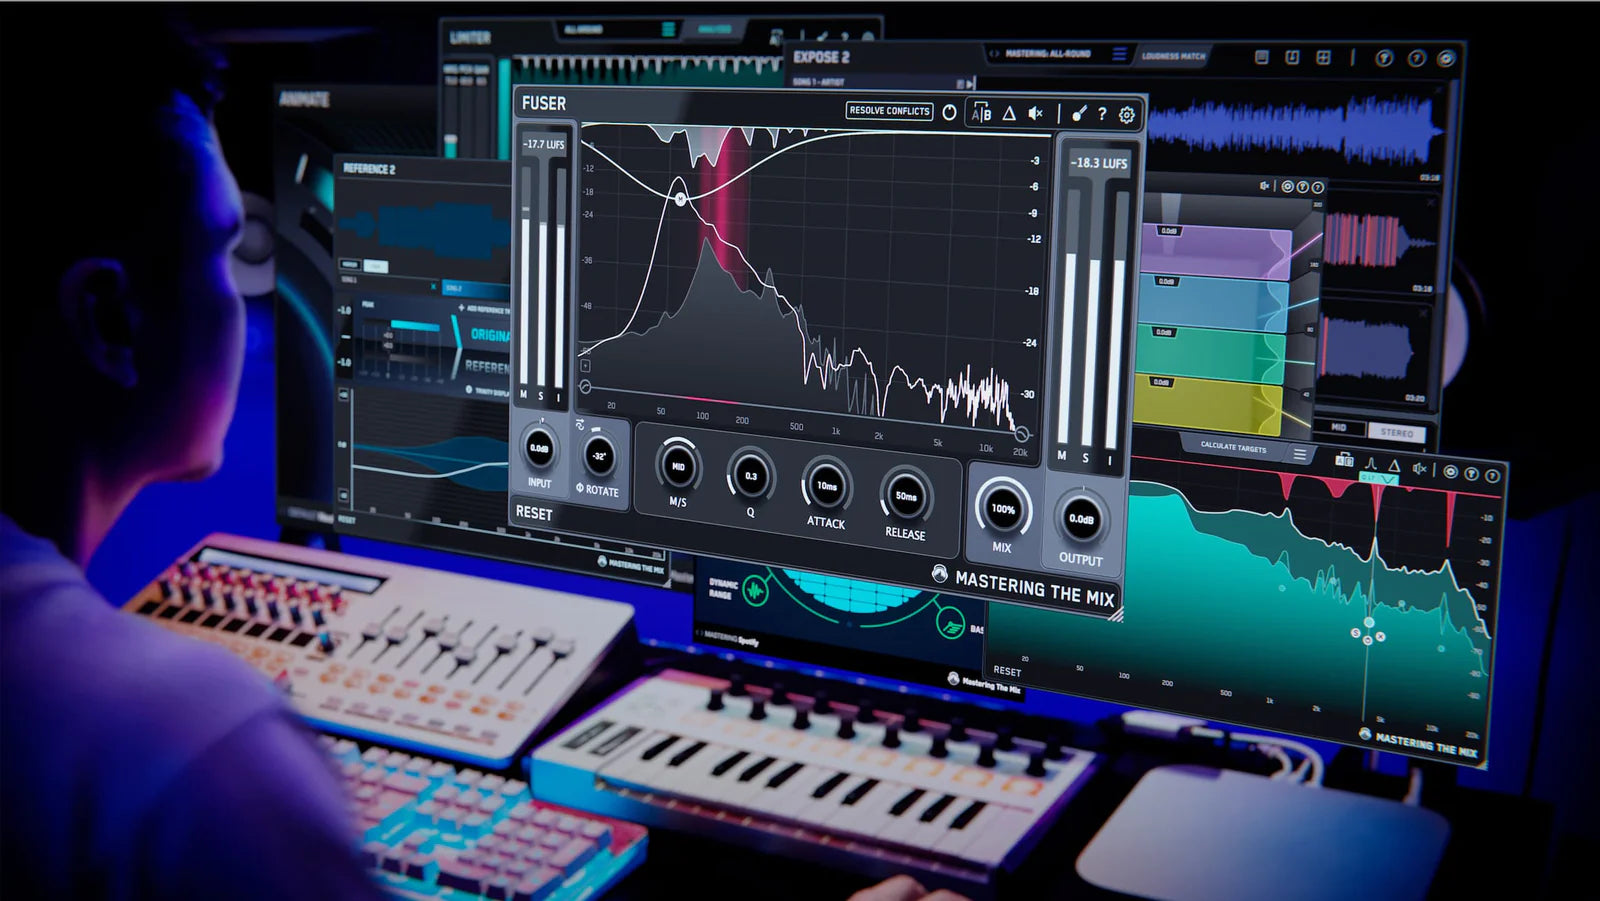 Mastering The Mix products